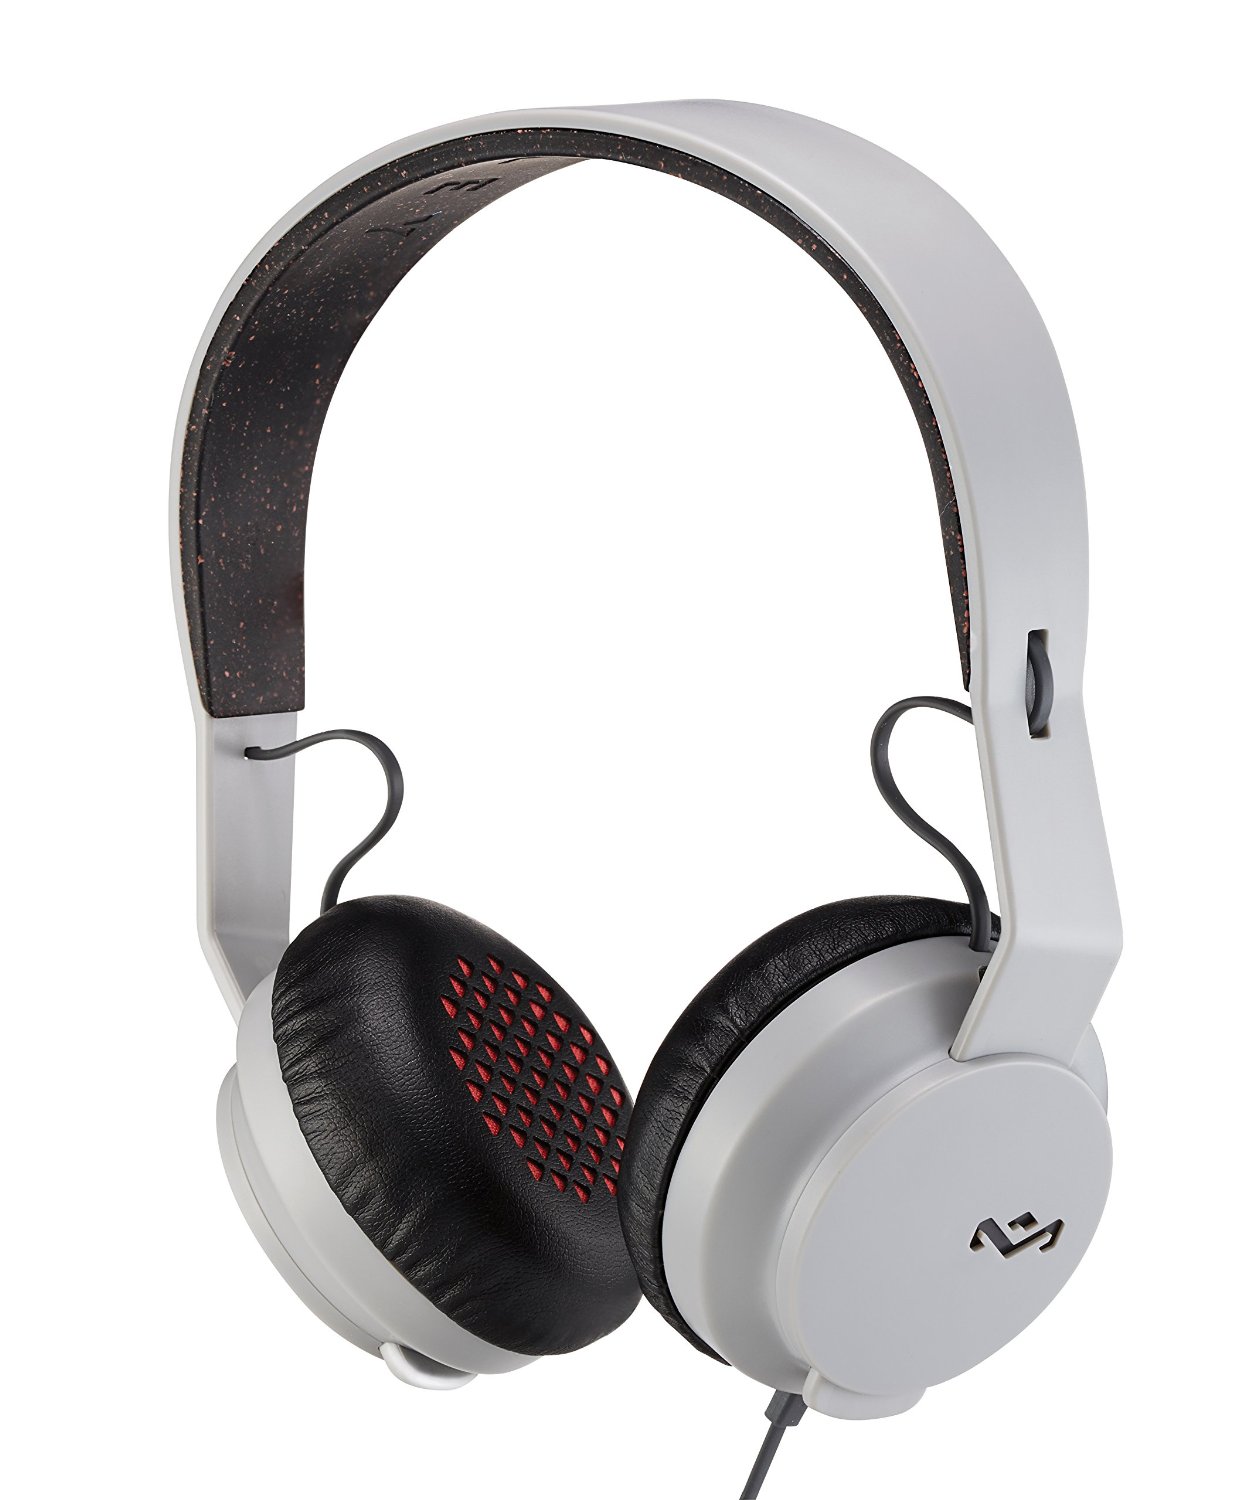 wireless-headphones-make-a-great-gift-idea-for-teens-or-preteens-both-boys-or-girls